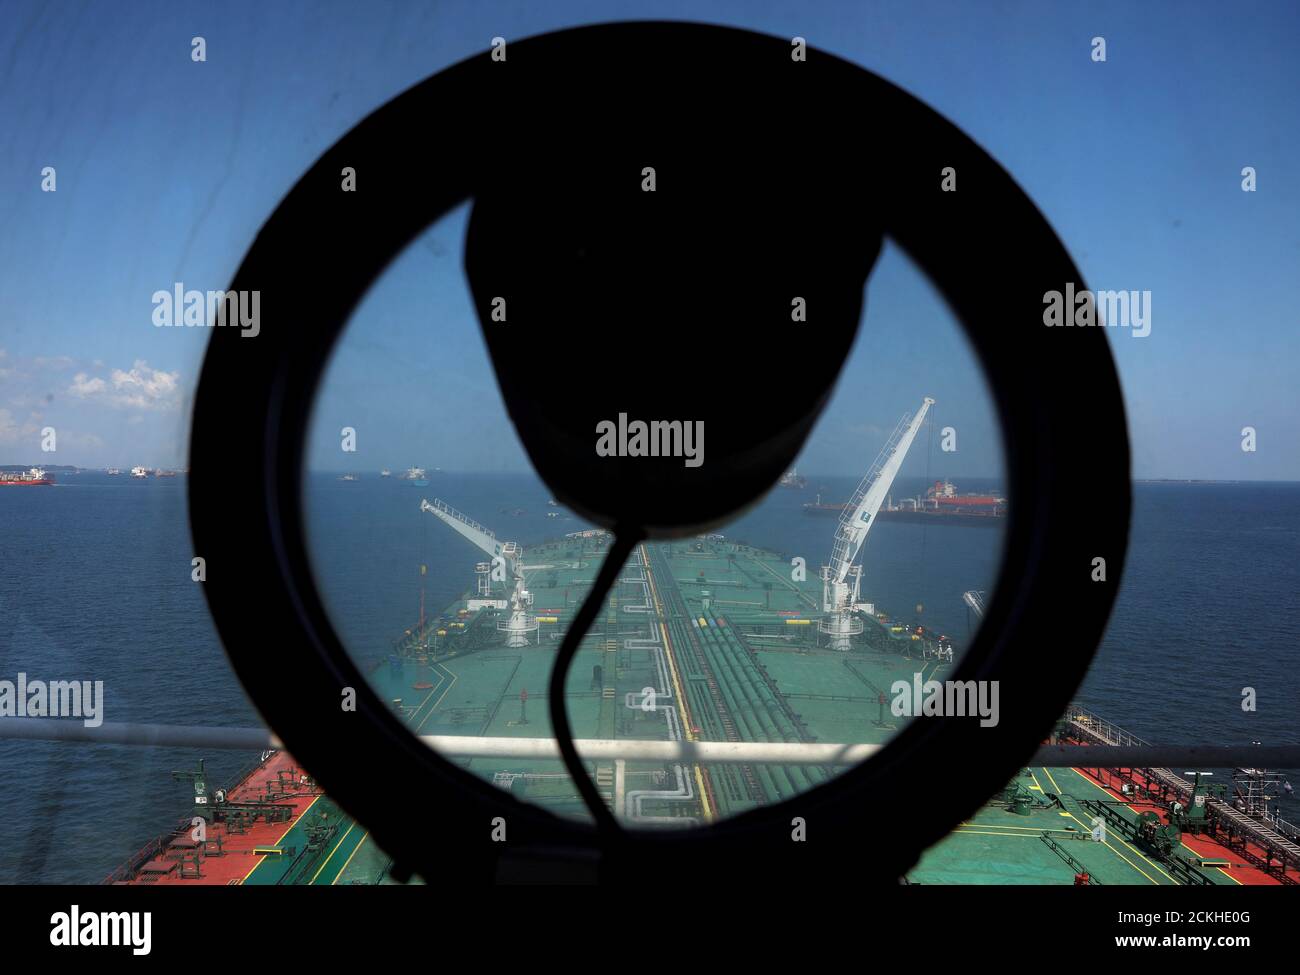 REFILE - CORRECTING TYPO IN SUPERTANKER'S NAME A view of Hin Leong's Pu Tuo San VLCC supertanker in the waters off Jurong Island in Singapore July 11, 2019.  Picture taken July 11, 2019.  REUTERS/Edgar Su Stock Photo